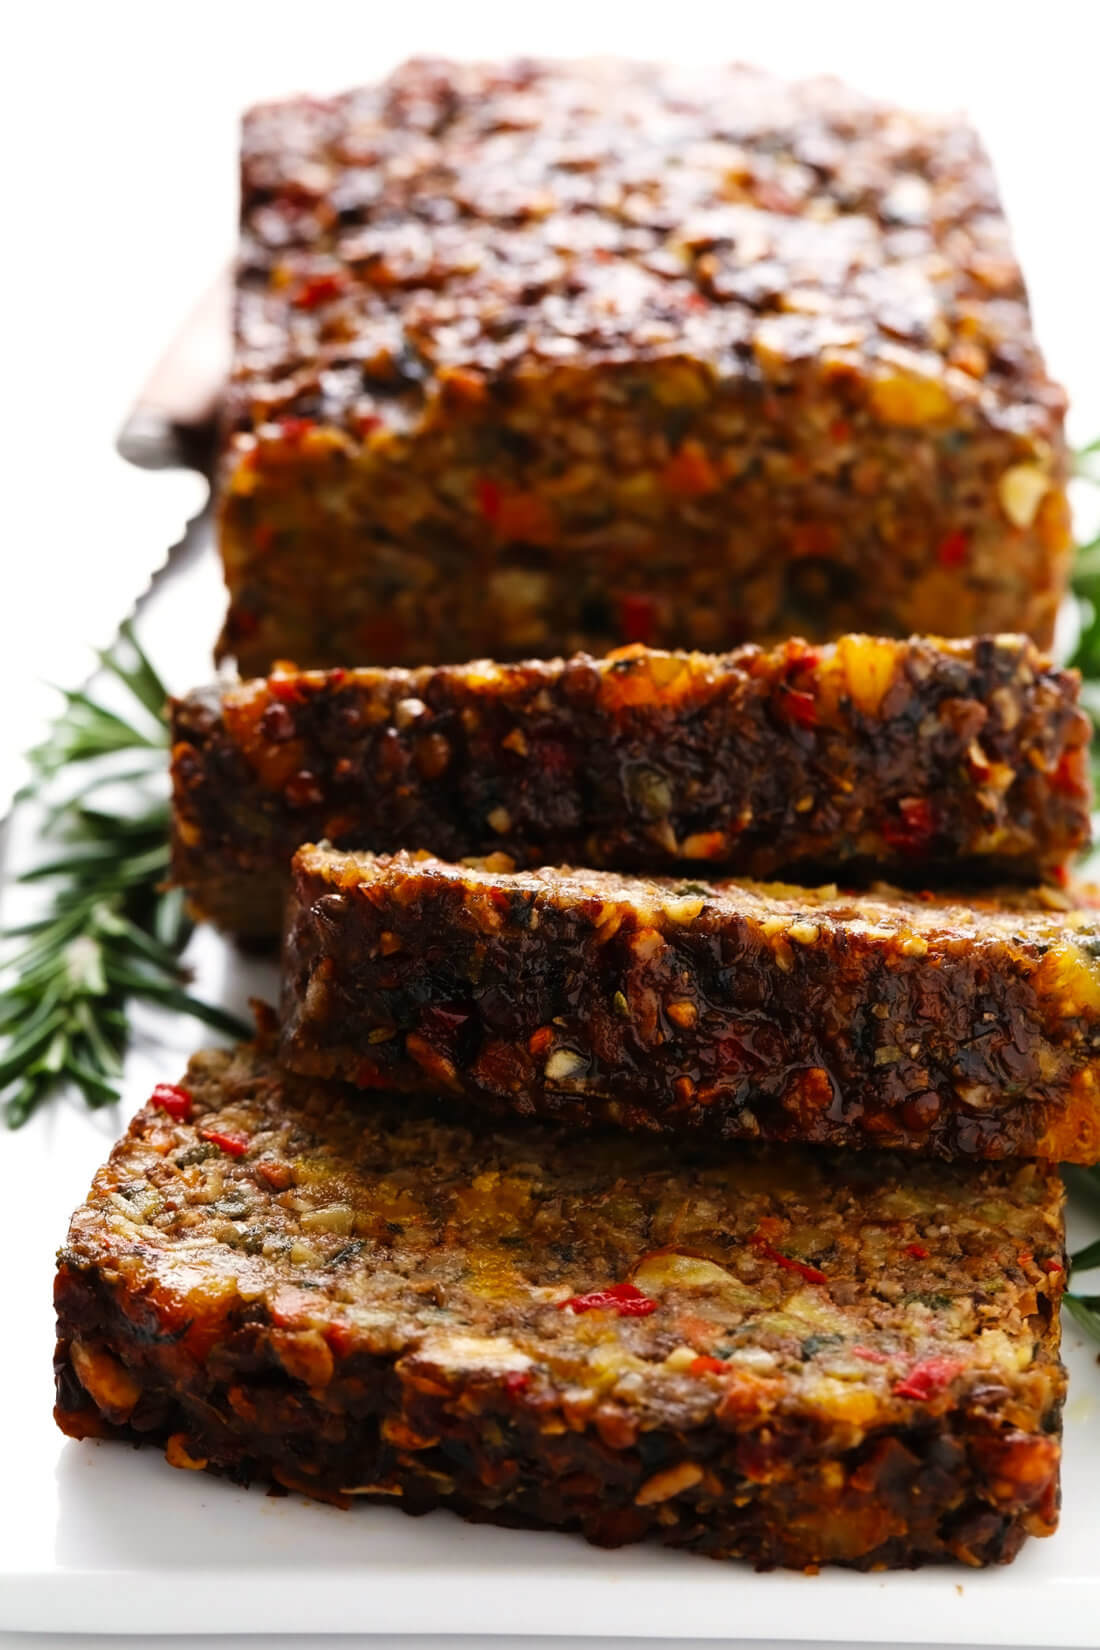 Amazing Nut Roast Recipe! - Gimme Some Oven